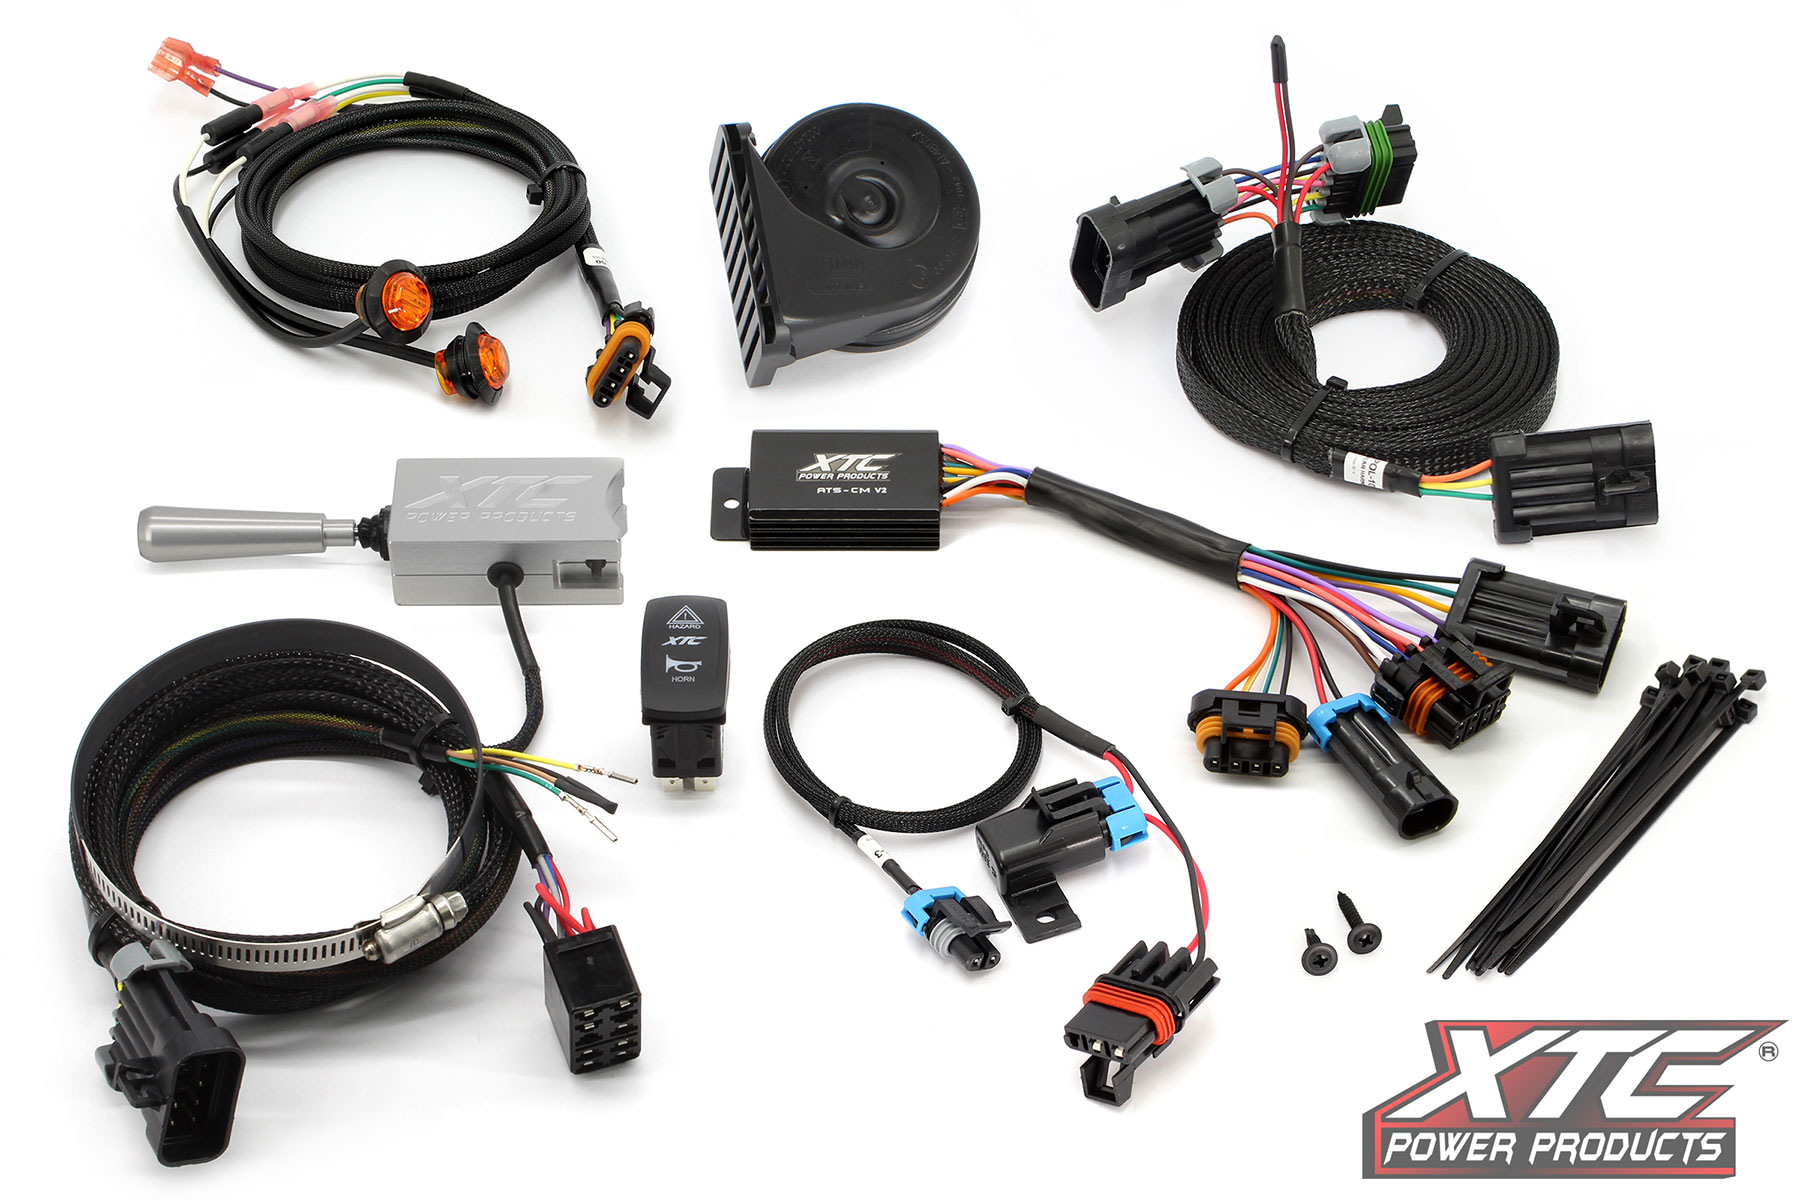 PACK 2 SUPPORTS FIXATION DOUBLE PHARES LED ADDITIONNELS POLARIS RZR